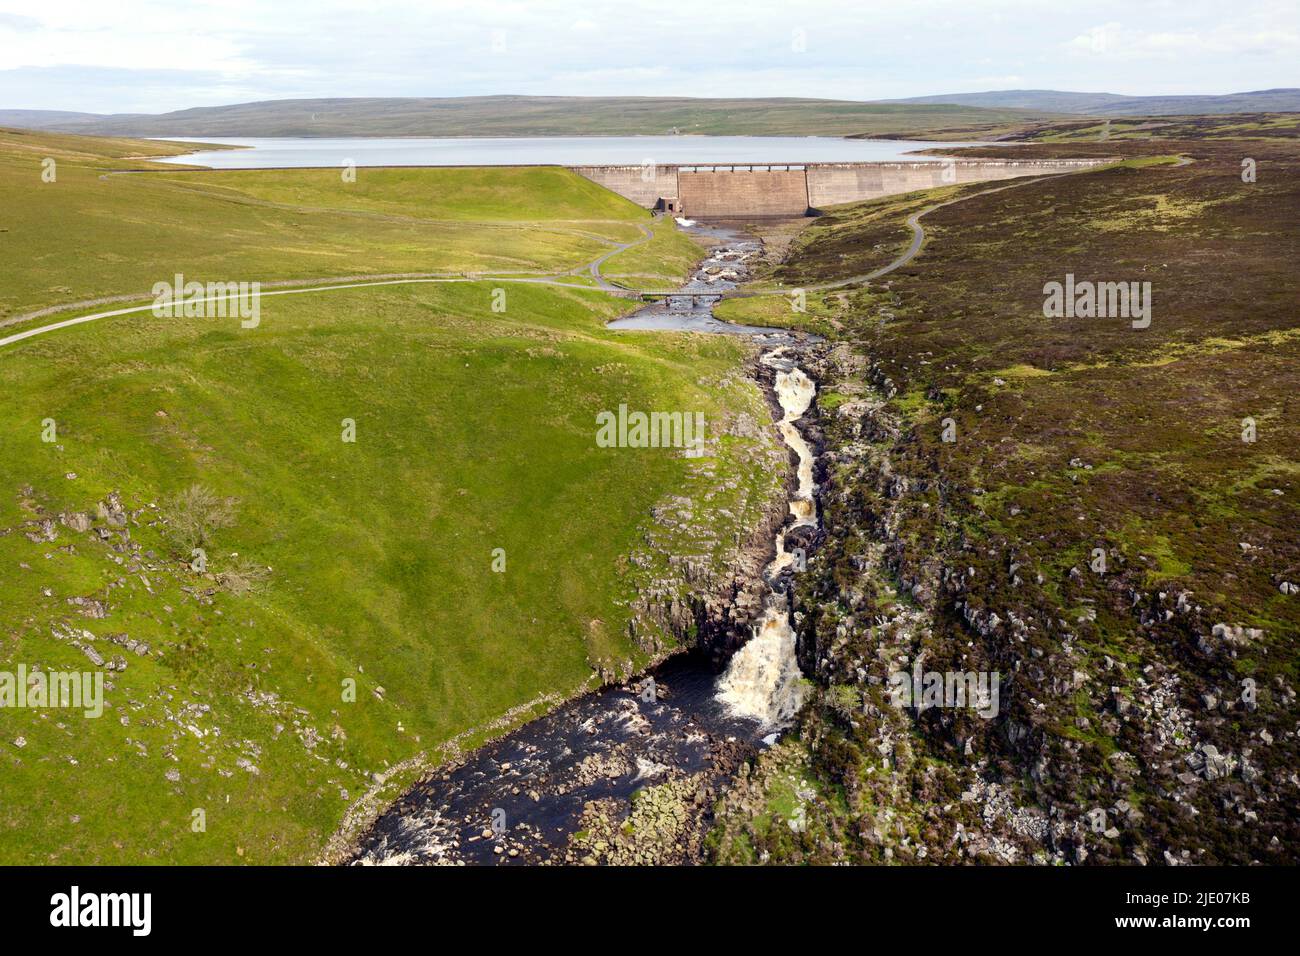 Il fiume Tees e Cauldron snout con Cow Green Reservoir Beyond, Upper Teesdale, County Durham, Regno Unito Foto Stock